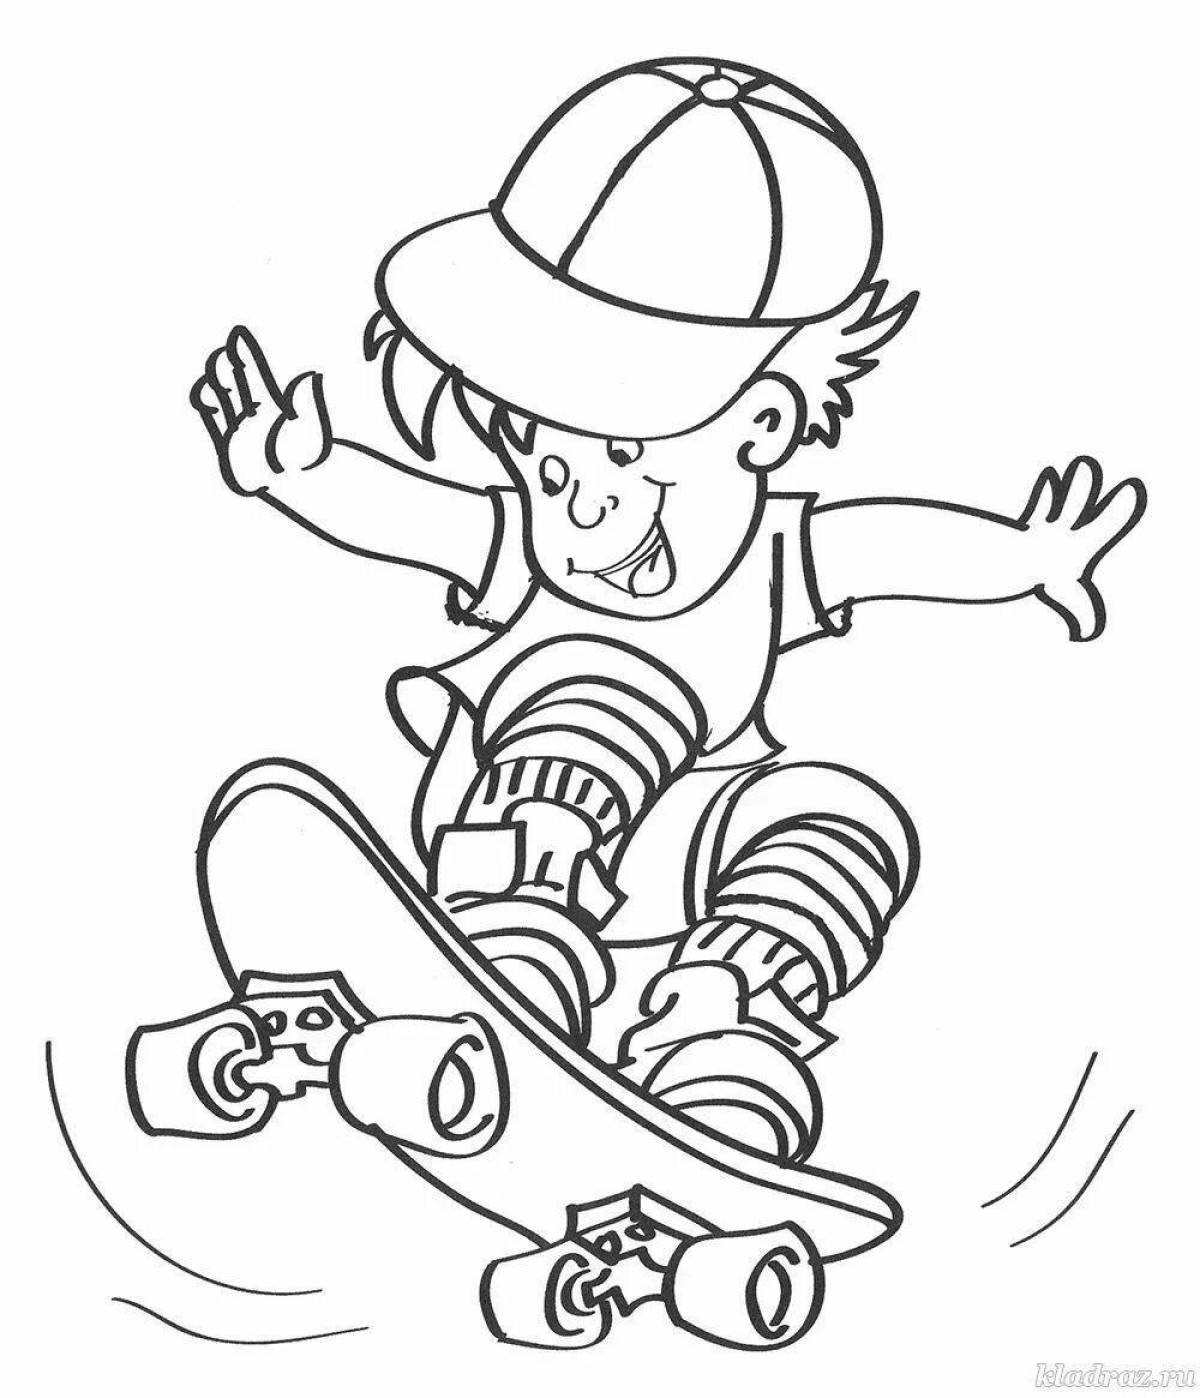 Entertaining sports coloring pages for children 5-6 years old